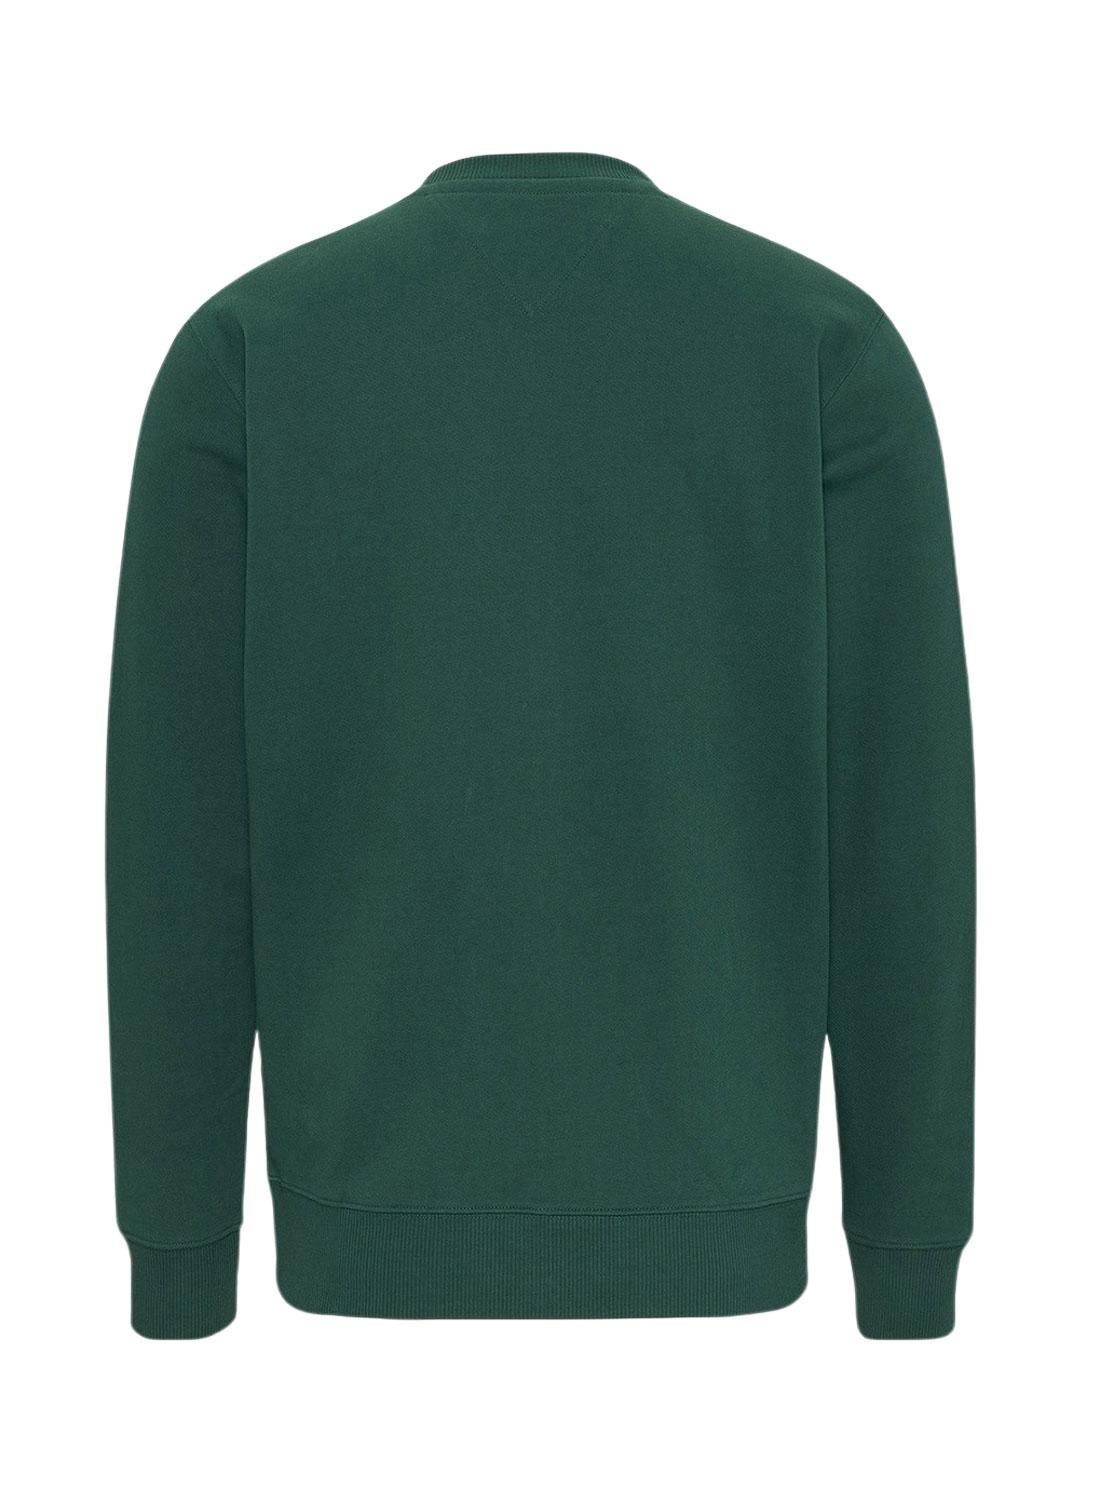 Sudadera Tommy Jeans Basic Graphic Hombre Verde